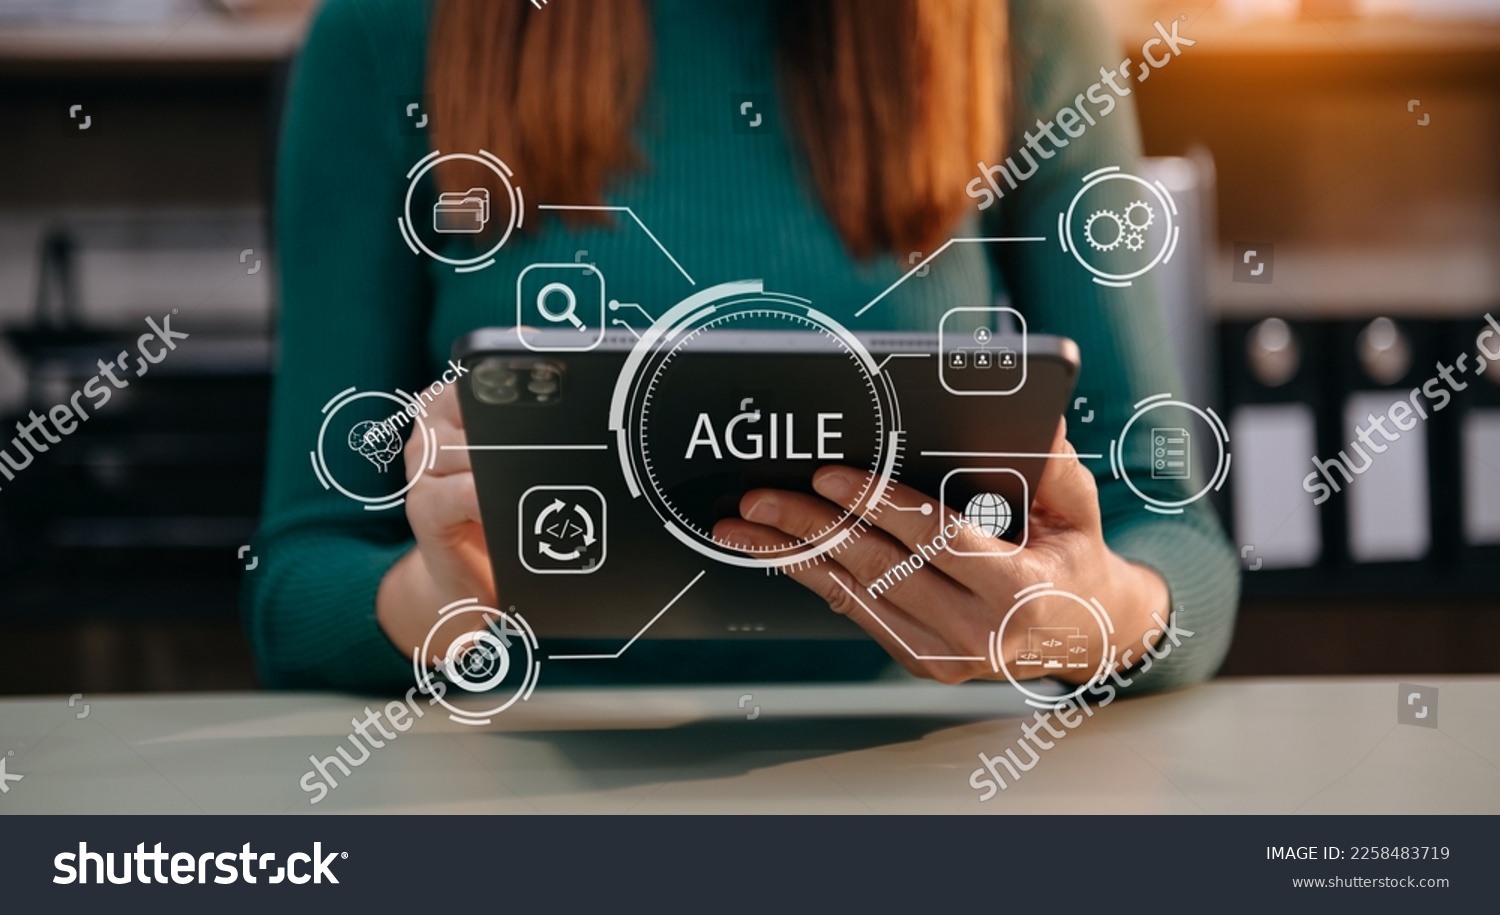 Agile development methodology concept. Business hand using laptop computer and tablet with virtual screen Agile icon on modern office digital technology concept. #2258483719